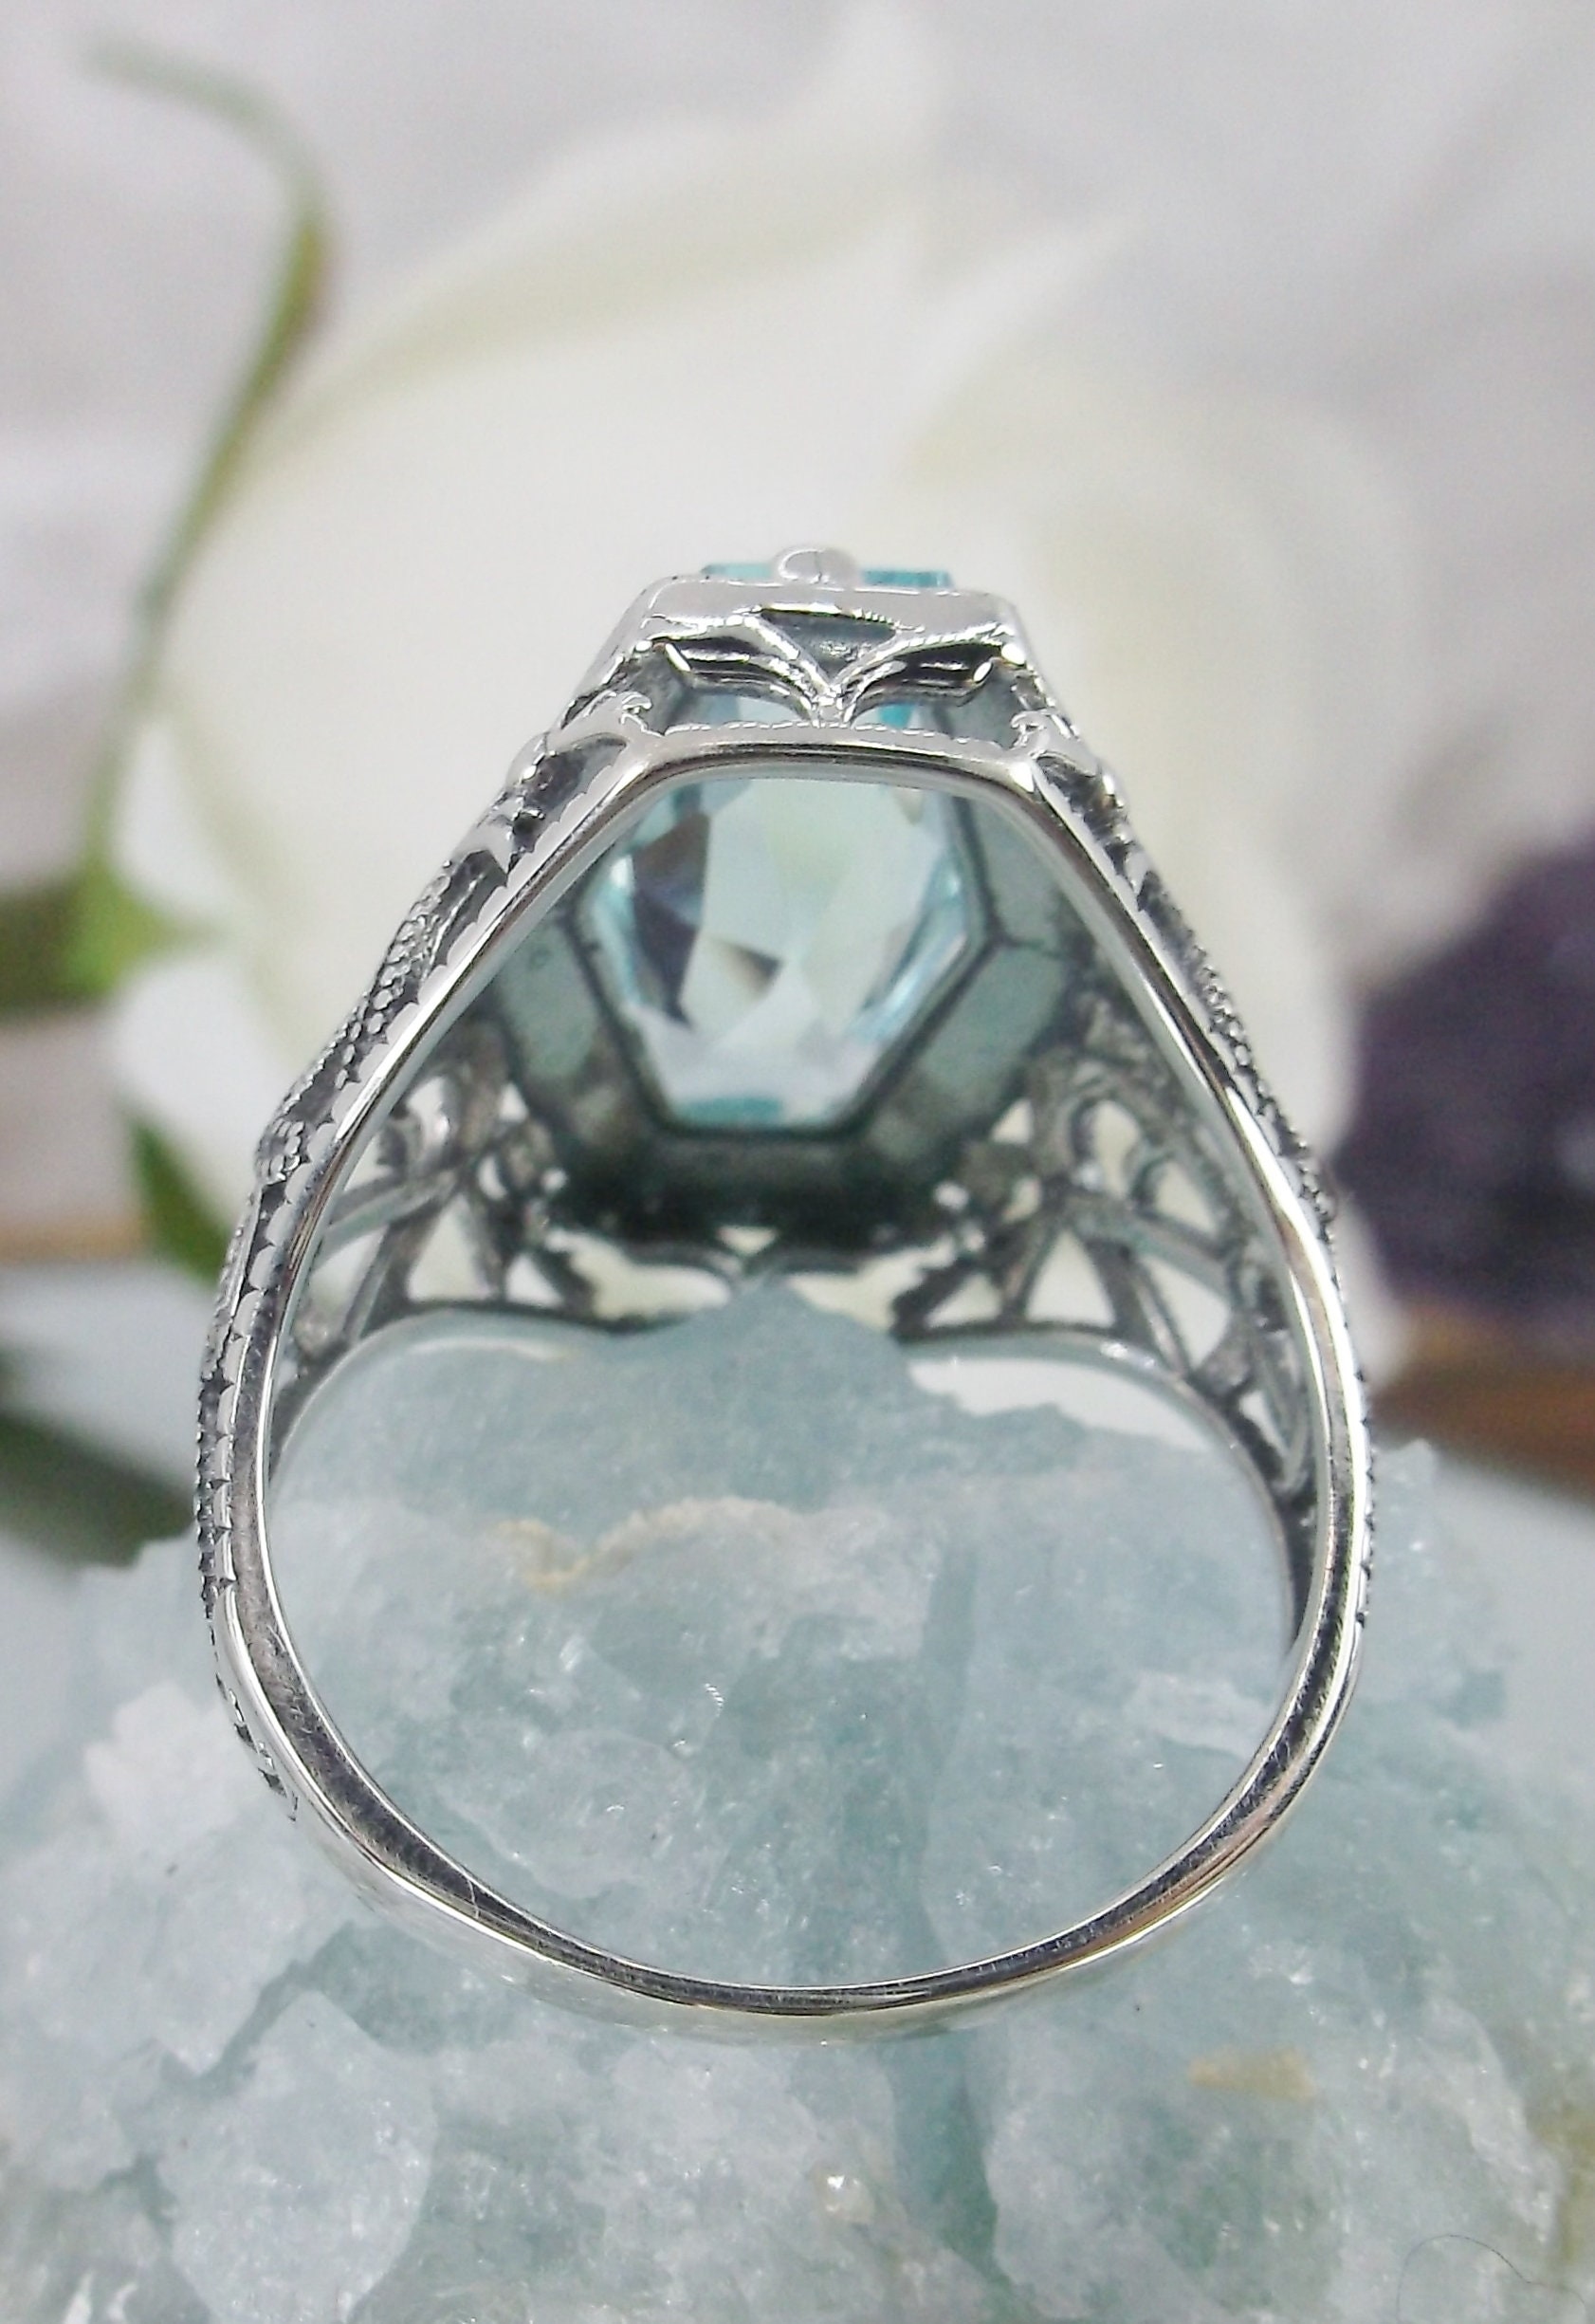 Aquamarine Ring/ Solid Sterling Silver/ 4ct Hexagon Simulated | Etsy